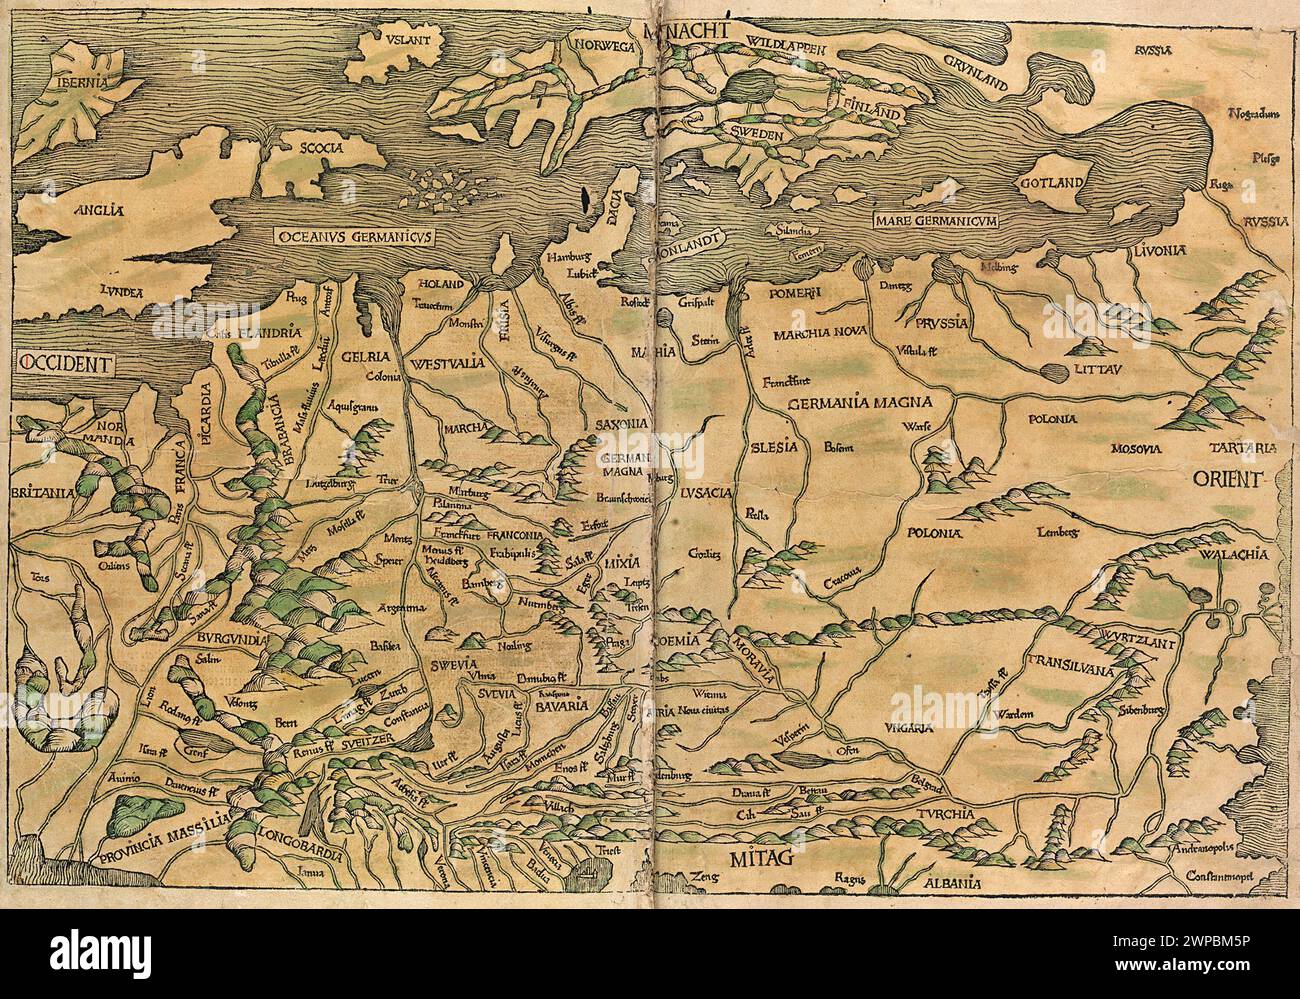 A beautiful woodcut from 1493 of a map of northern Europe. This illustration comes from the Nuremberg Chronicle, which is an enyclodpedia of world events, mythology and christian history. This extra-ordinary work was one of the earliest books ever printed and the first to successfully integrate text and images. Stock Photo